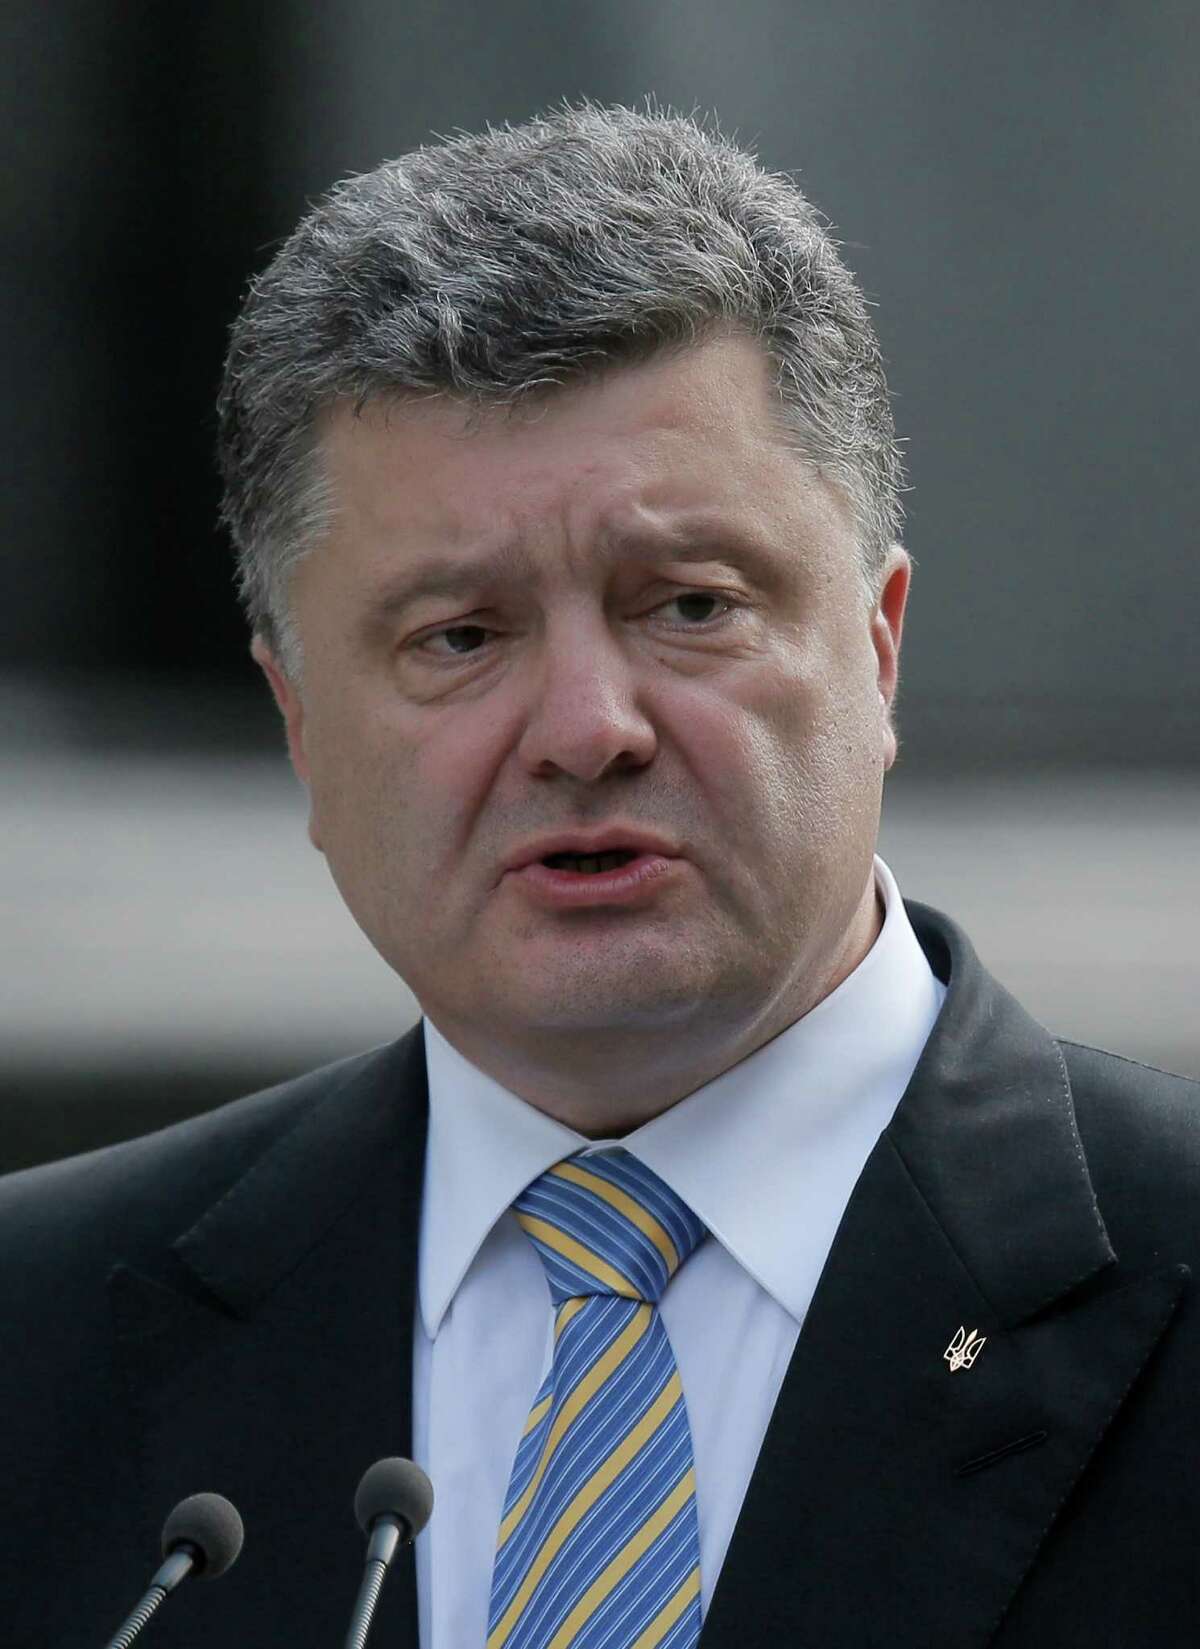 In this photo taken on Saturday, Aug. 23, 2014, Ukraine's President Petro Poroshenko makes a statement to the press in Kiev, Ukraine. Poroshenko on Monday, Aug. 25, dissolved parliament and called for early elections in October 26 as his country continues to battle a pro-Russian insurgency in its eastern regions. (AP Photo/Efrem Lukatsky)